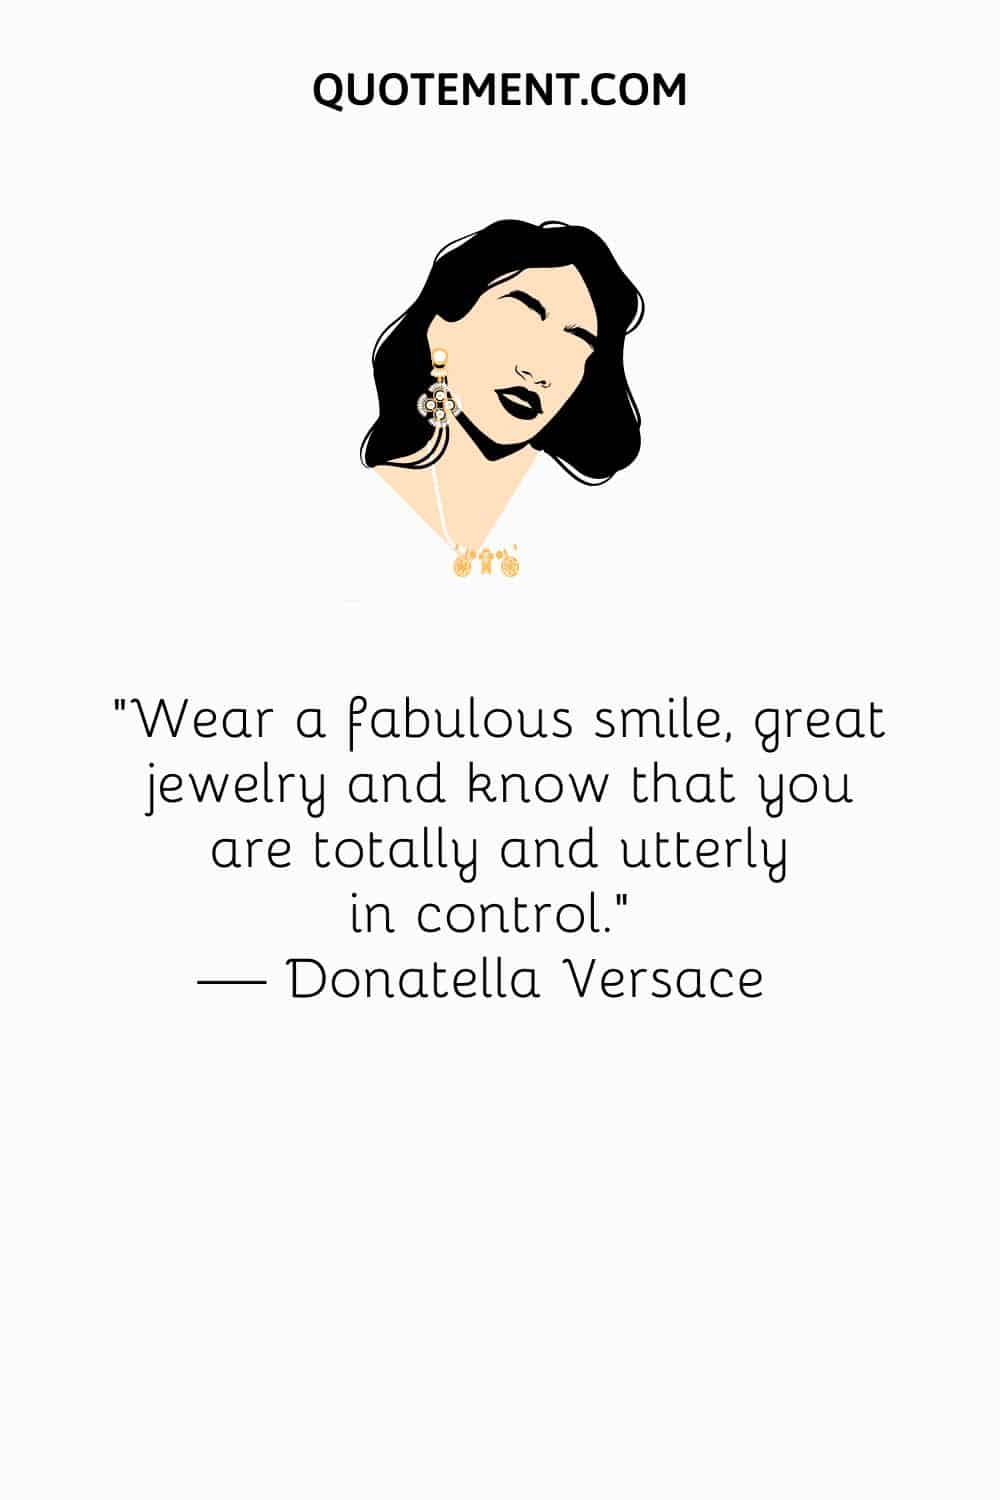 Wear a fabulous smile, great jewelry and know that you are totally and utterly in control